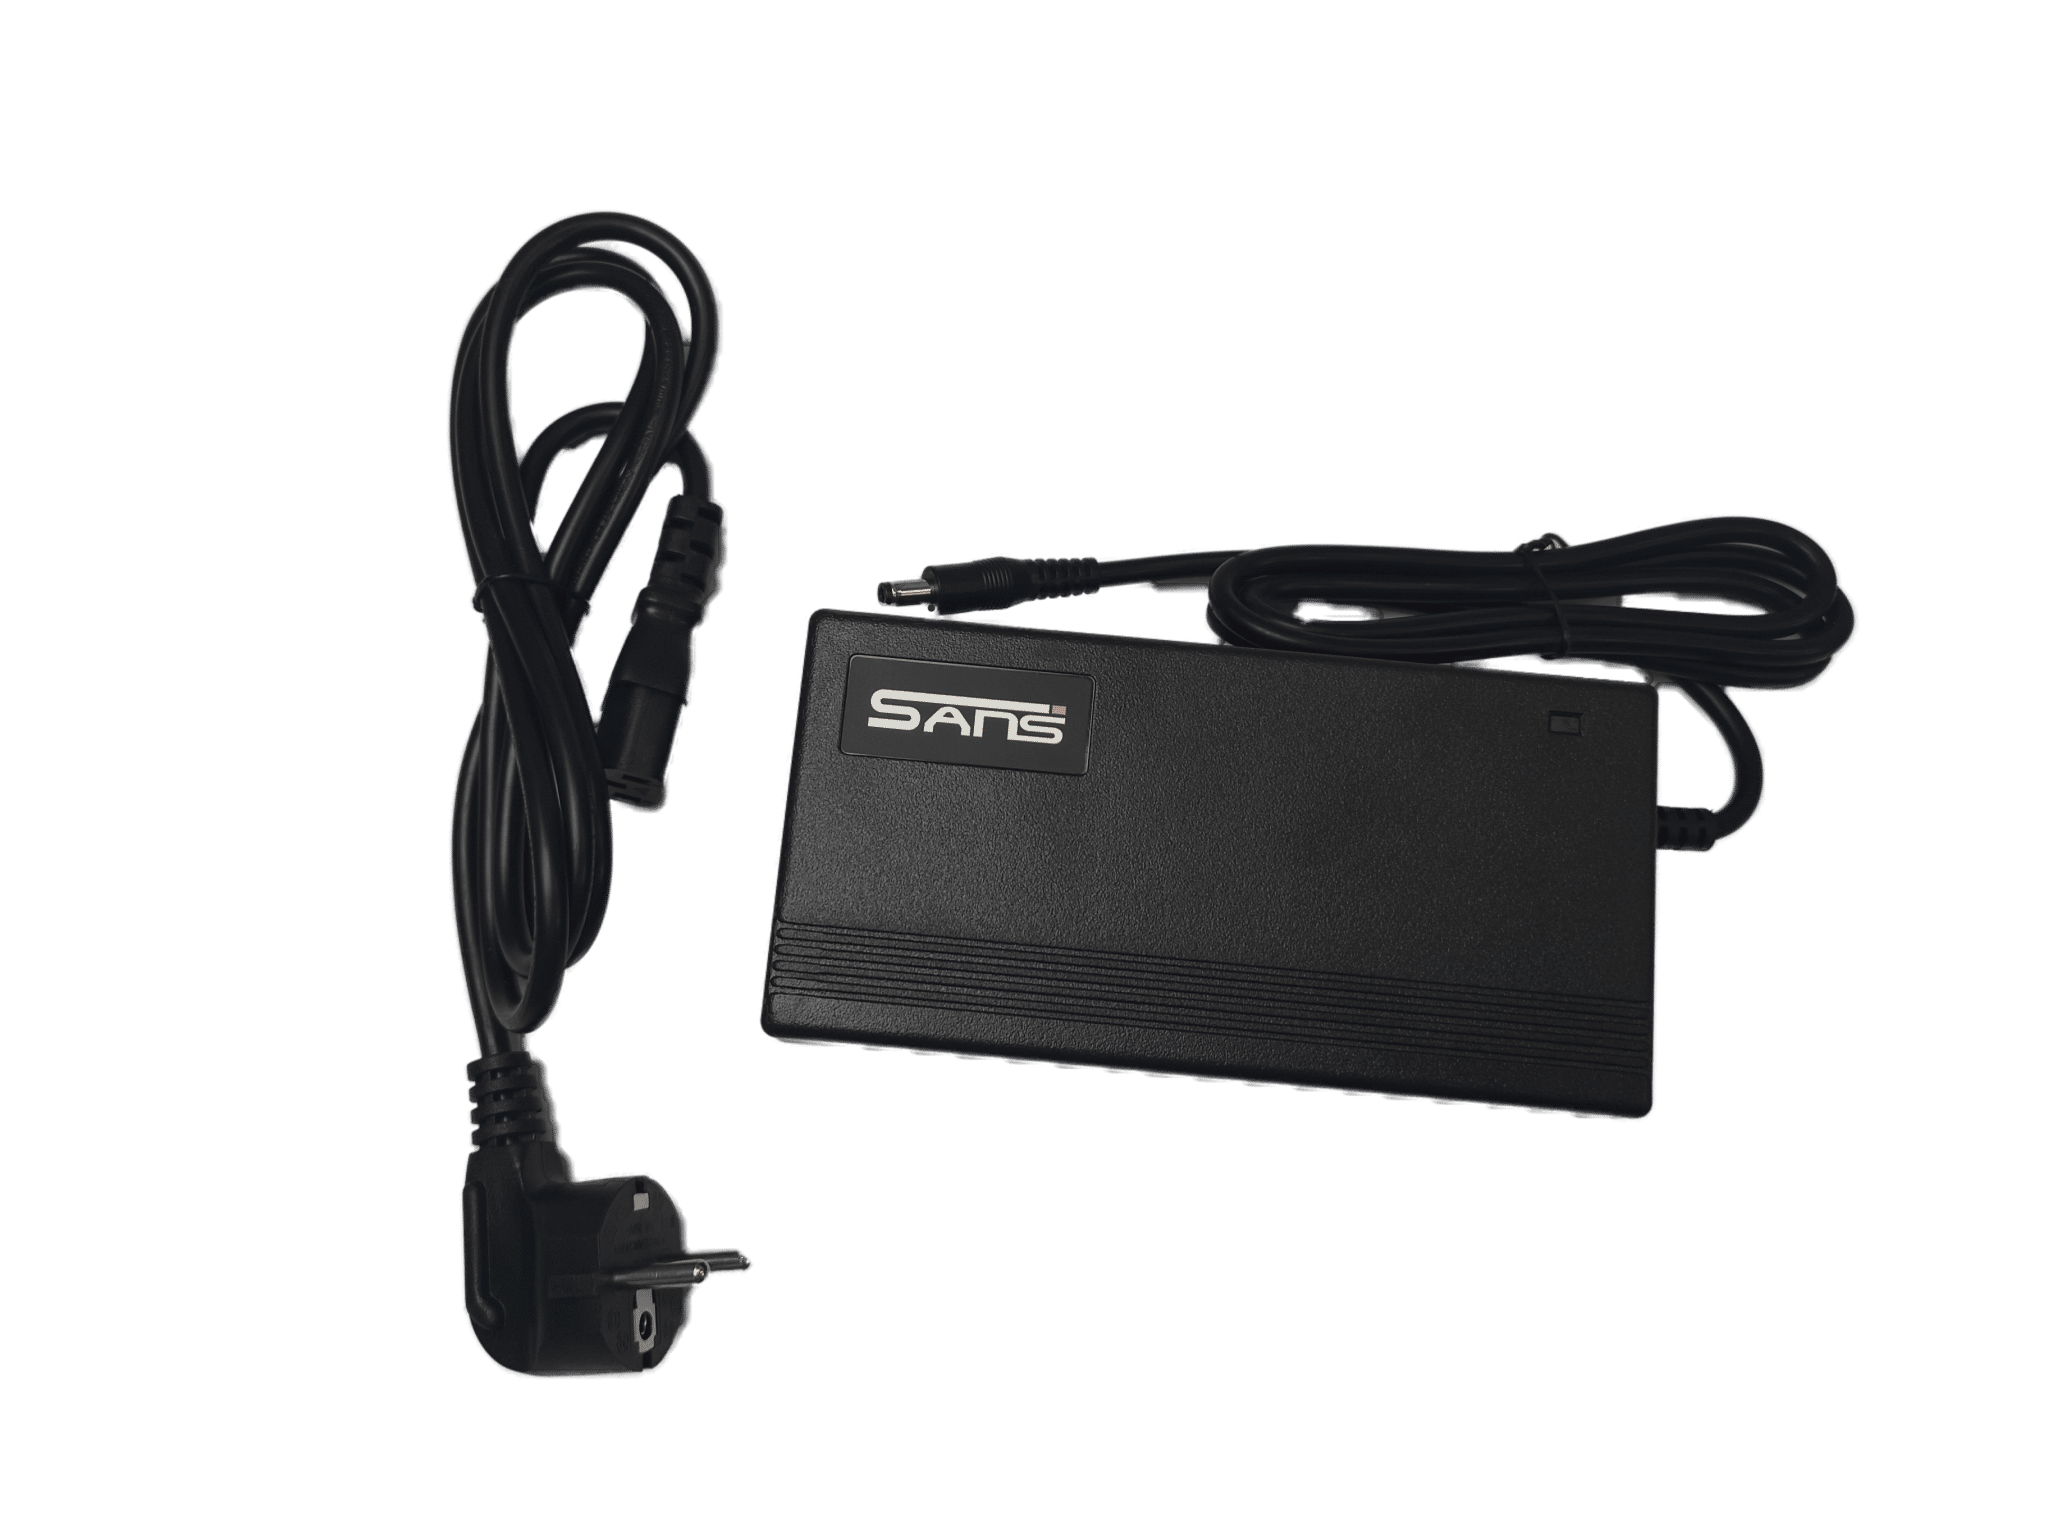 CHARGEUR 48V 1PIN  Ebikestock France